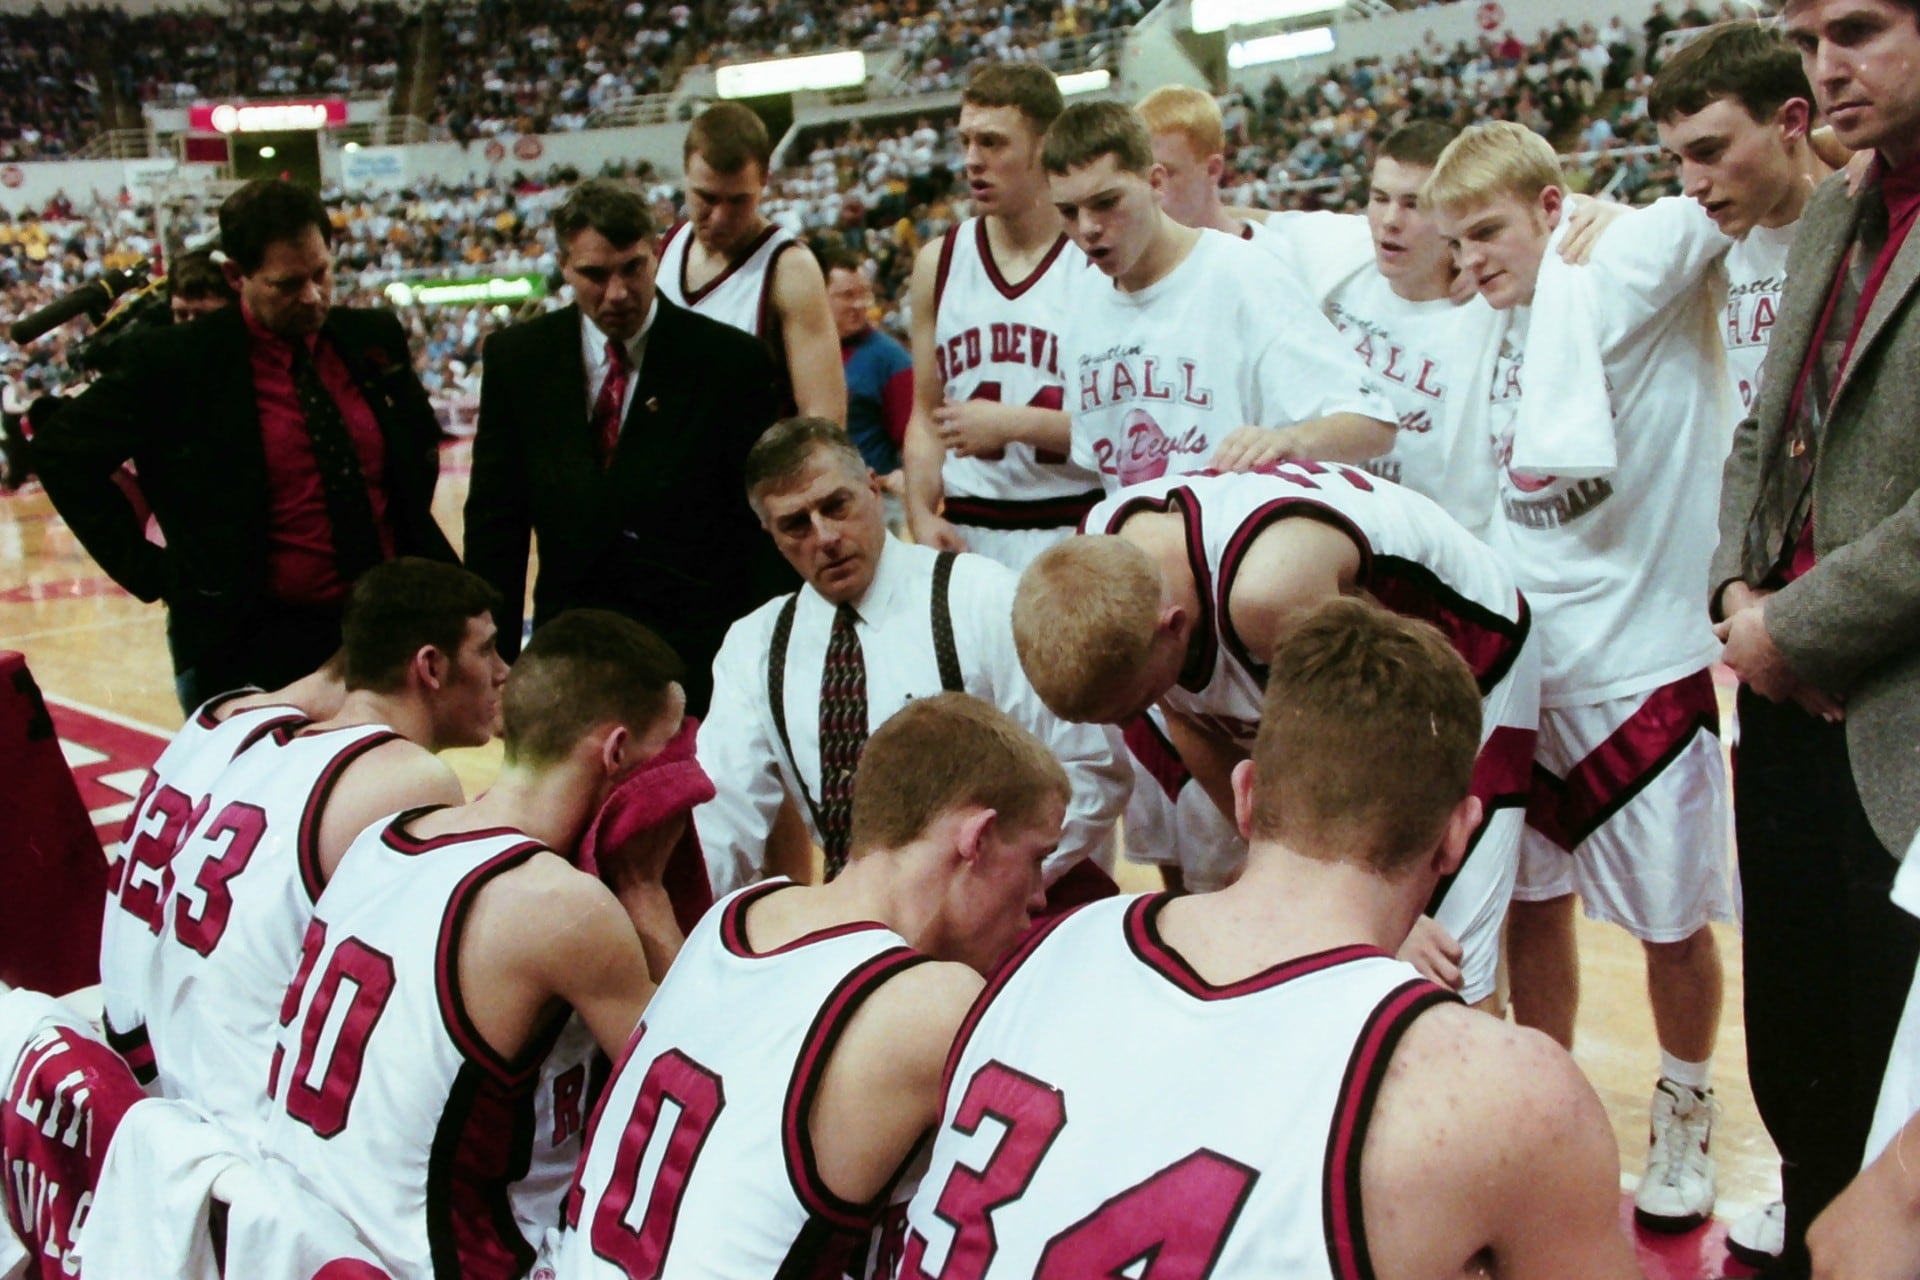 Bureau County Sports Hall of Fame: Hall Red Devils basketball teams made historic run